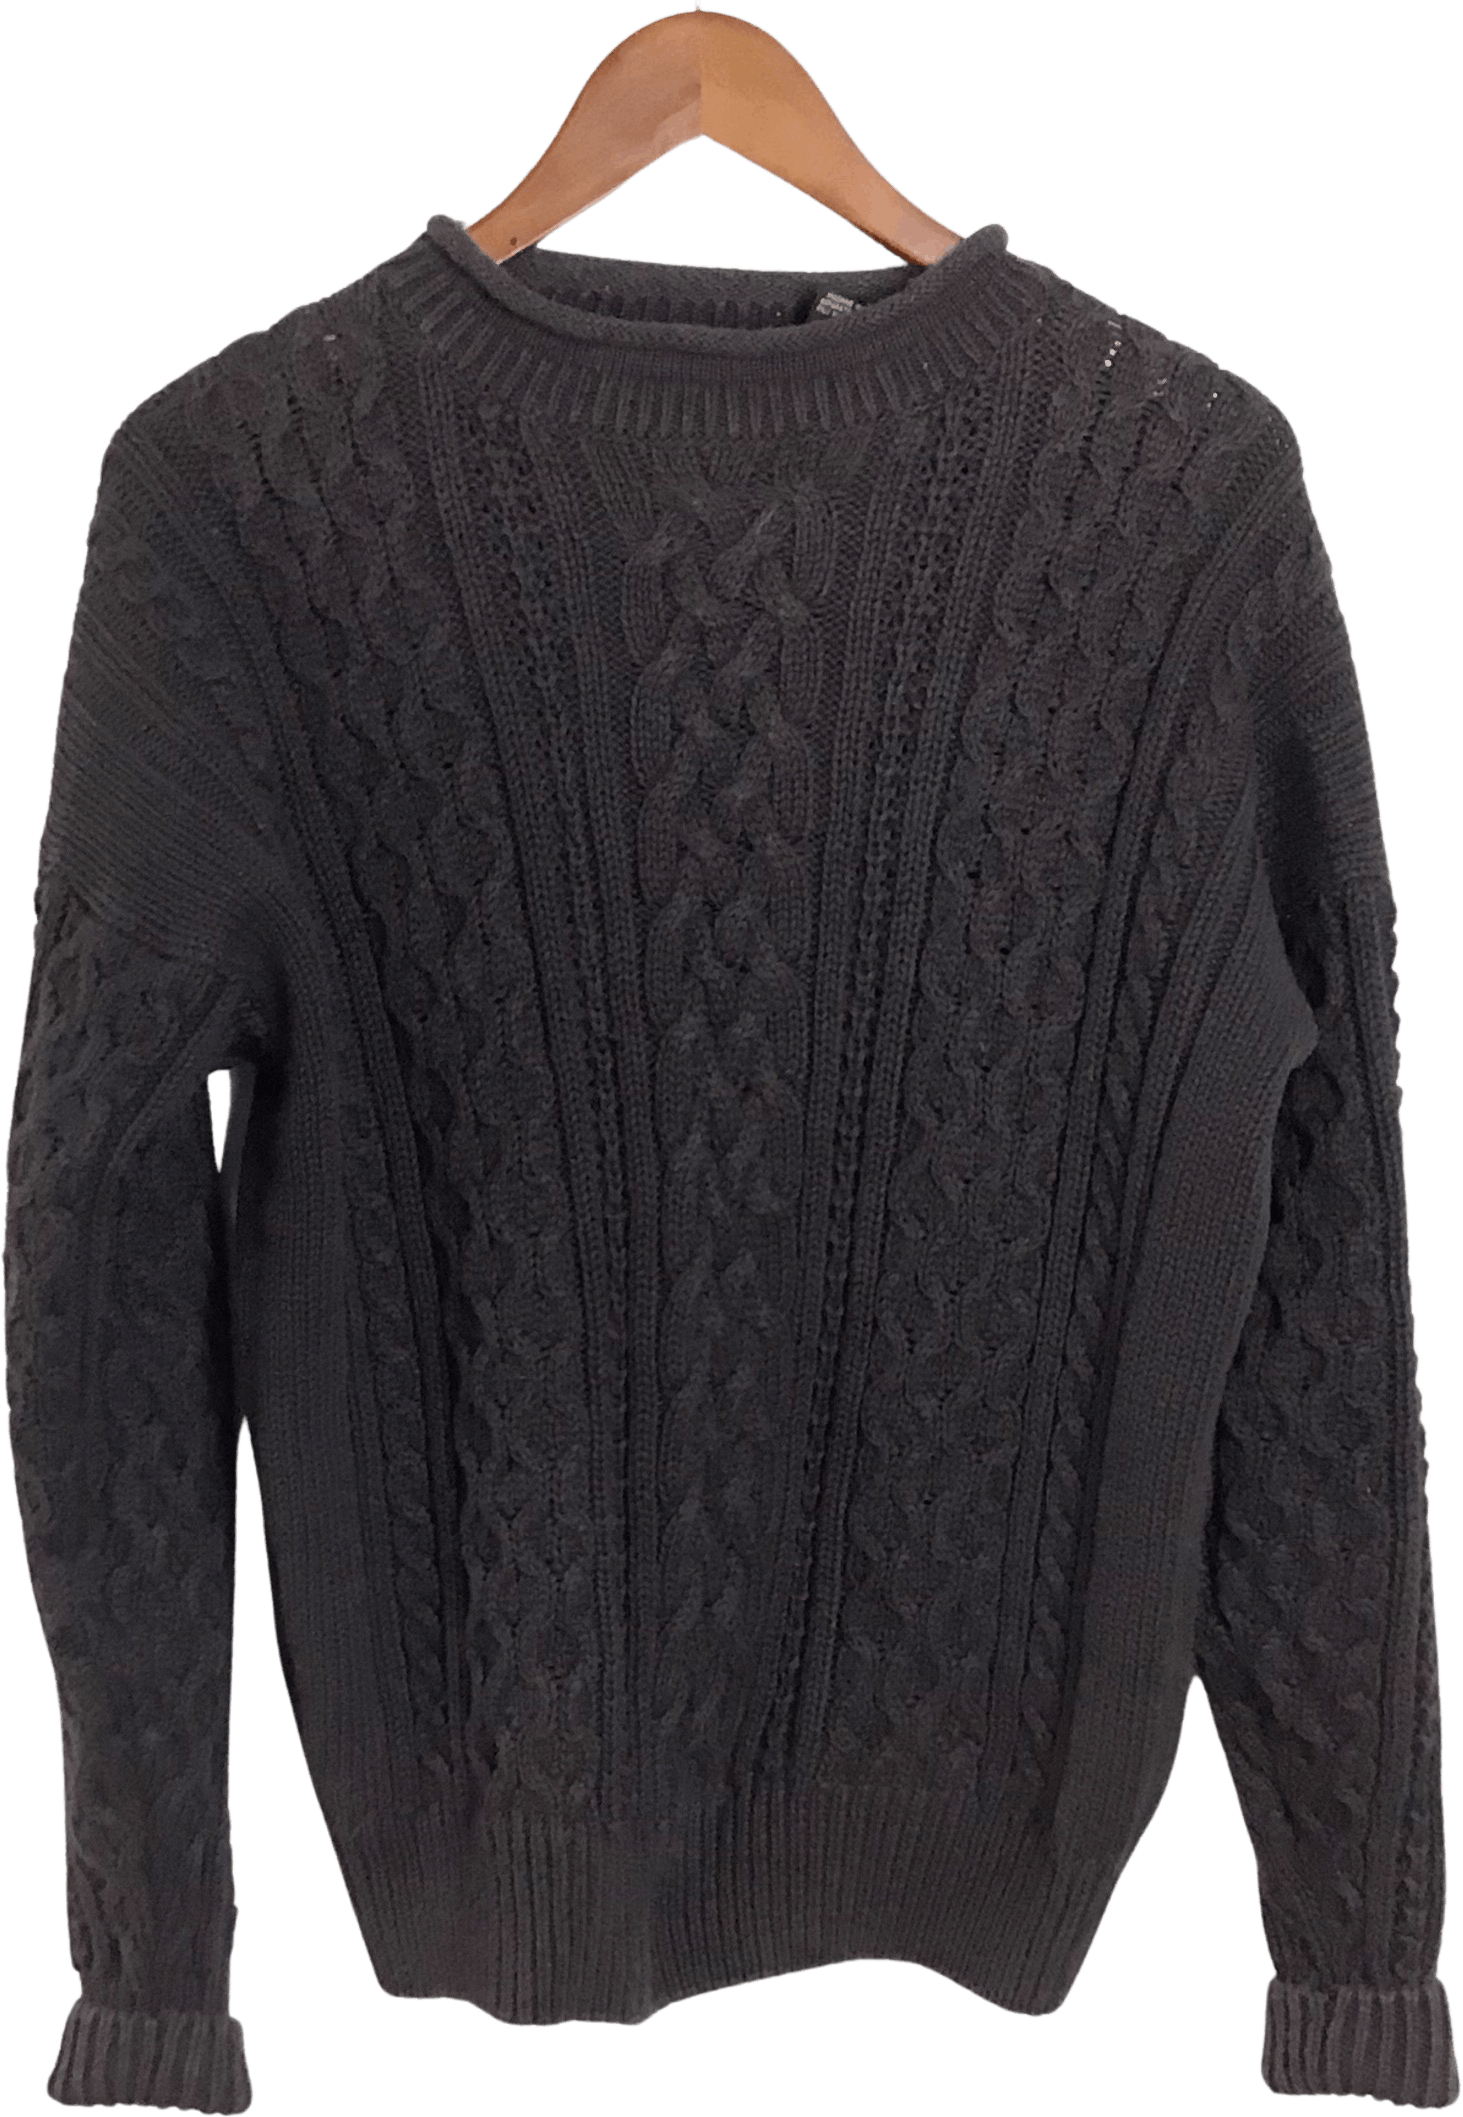 Vintage Men's Brown Sweater by Structure | Shop THRILLING